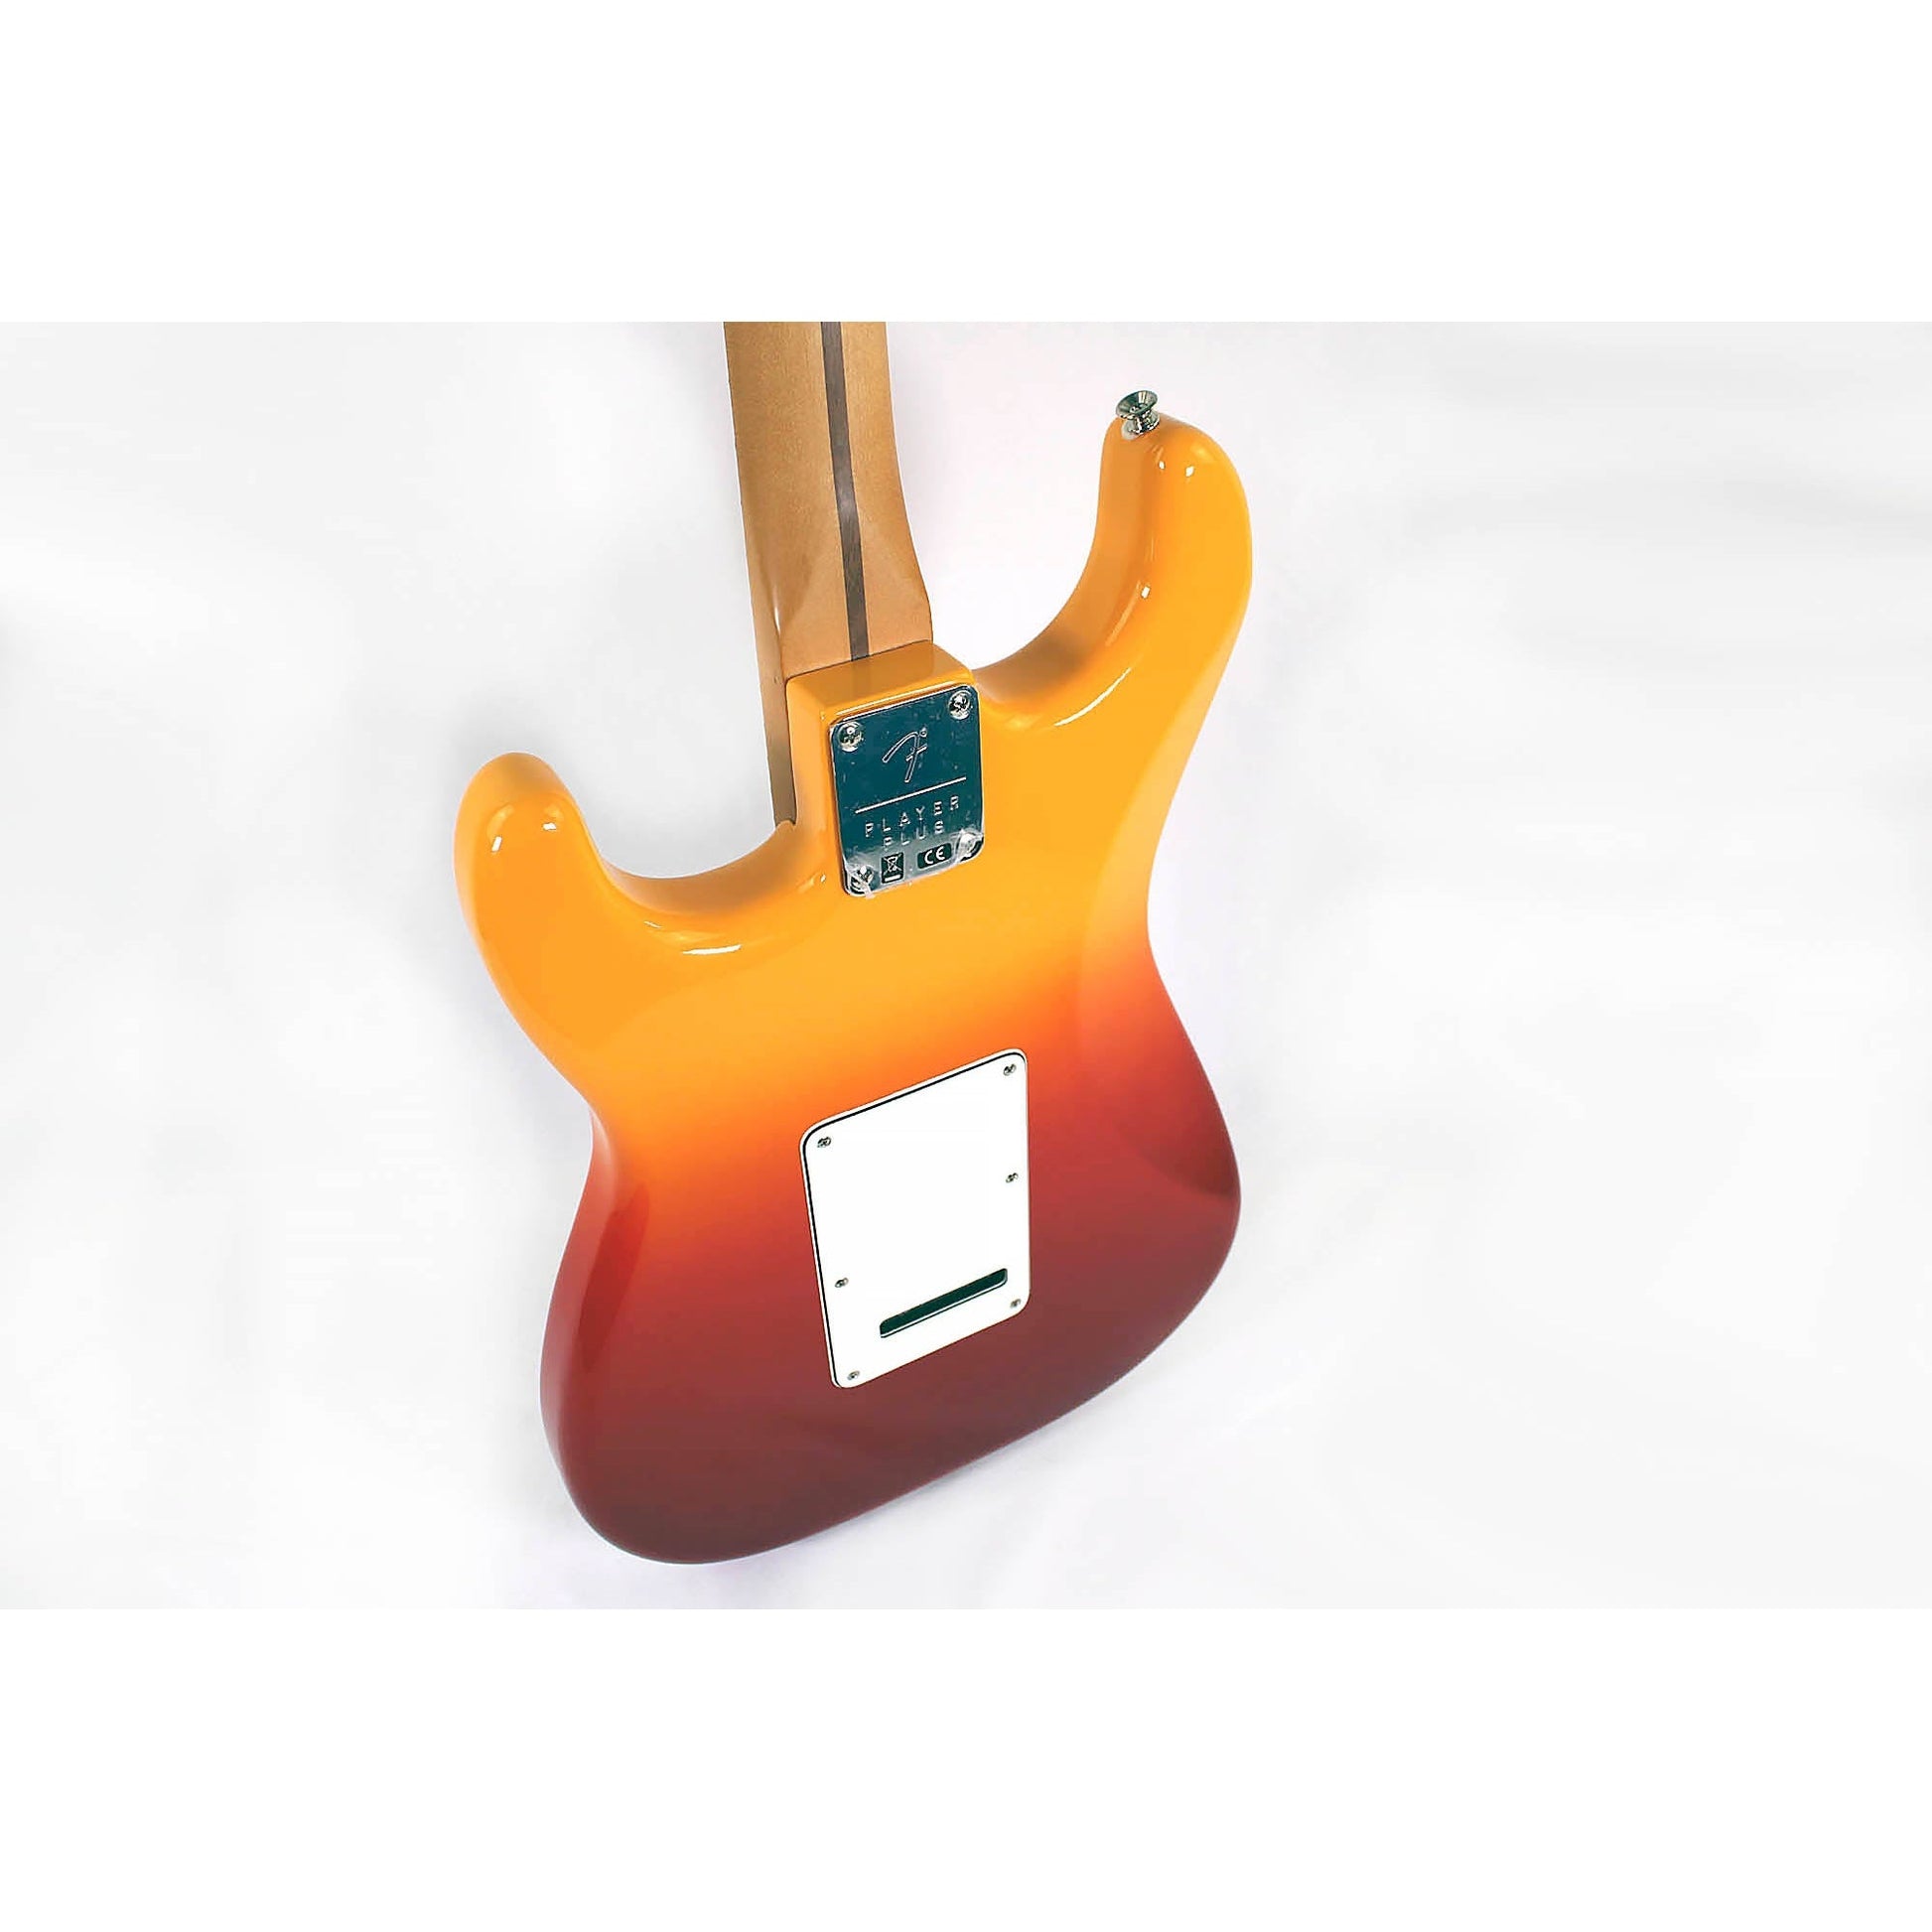 Fender Player Plus Stratocaster - Tequila Sunrise with Maple Neck - Leitz Music-885978742325-0147312387